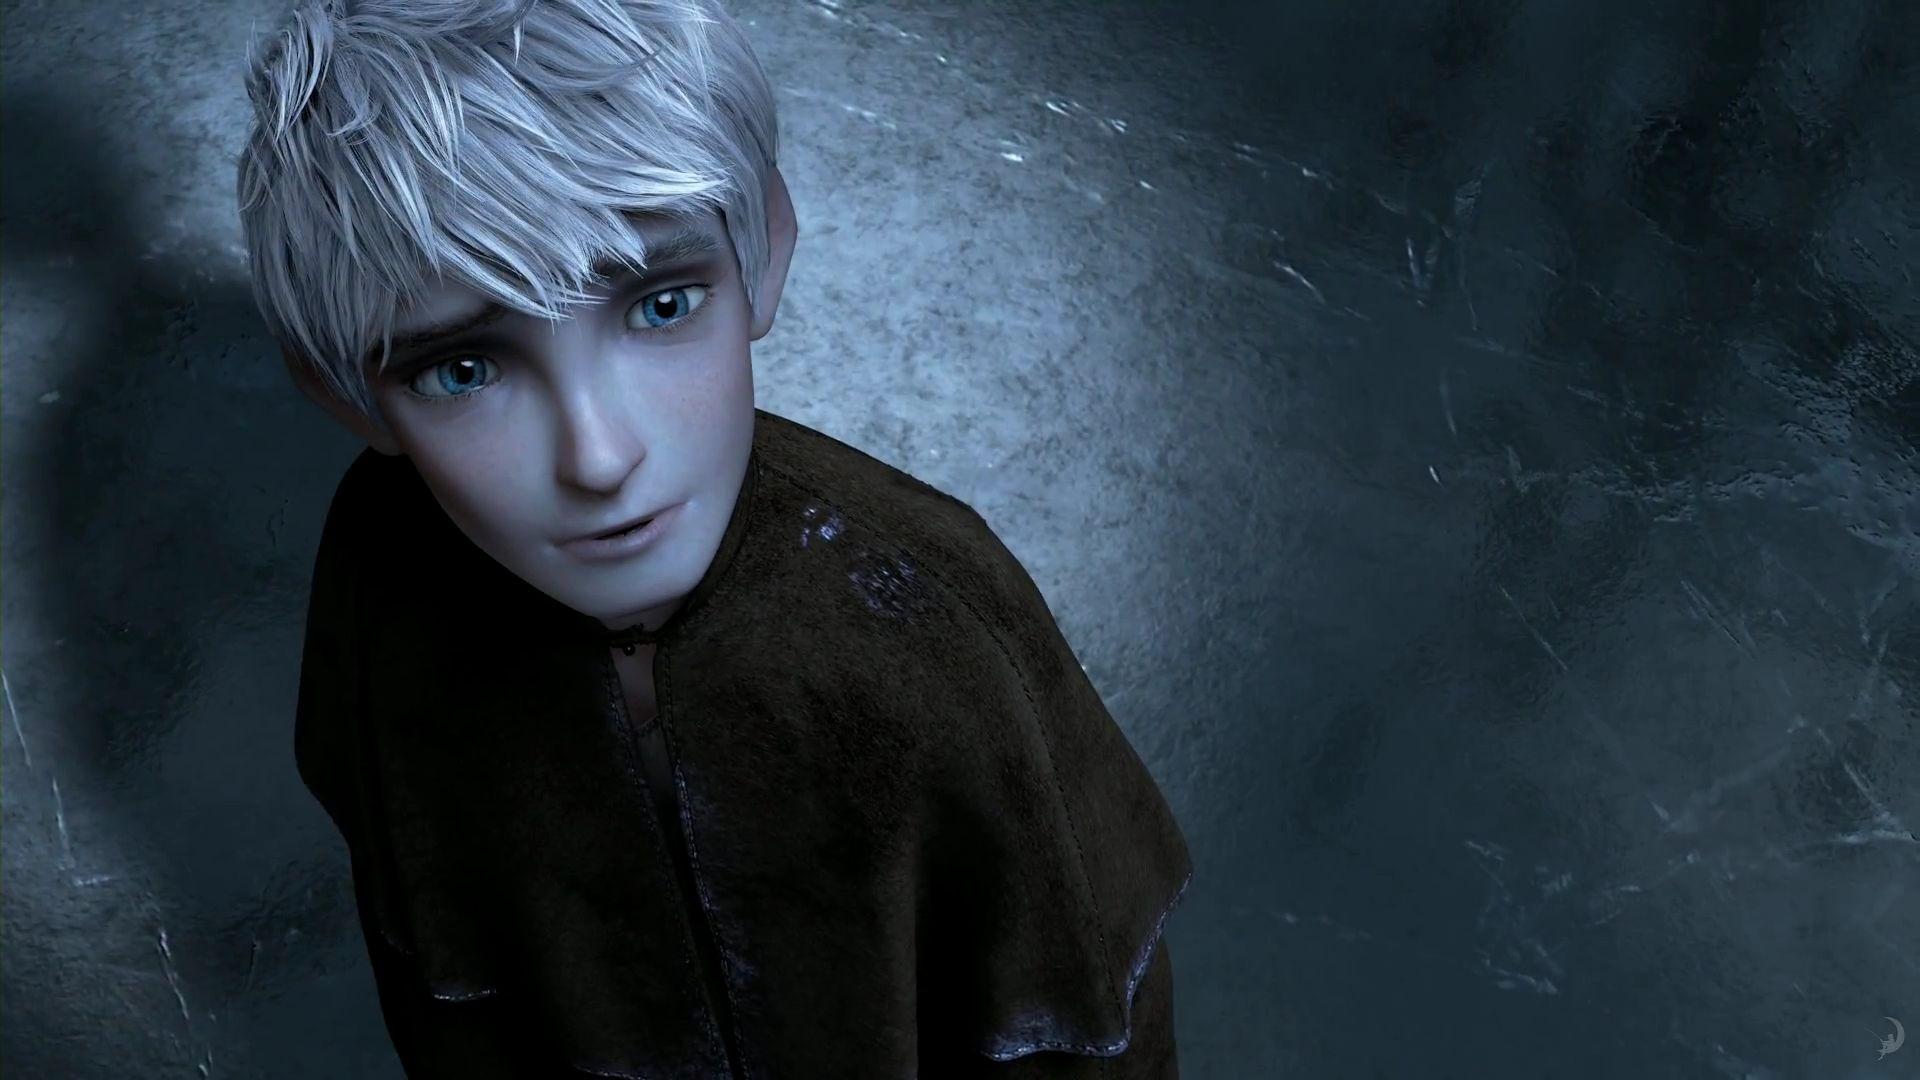 Best image about Rise of the Guardians. Hiccup